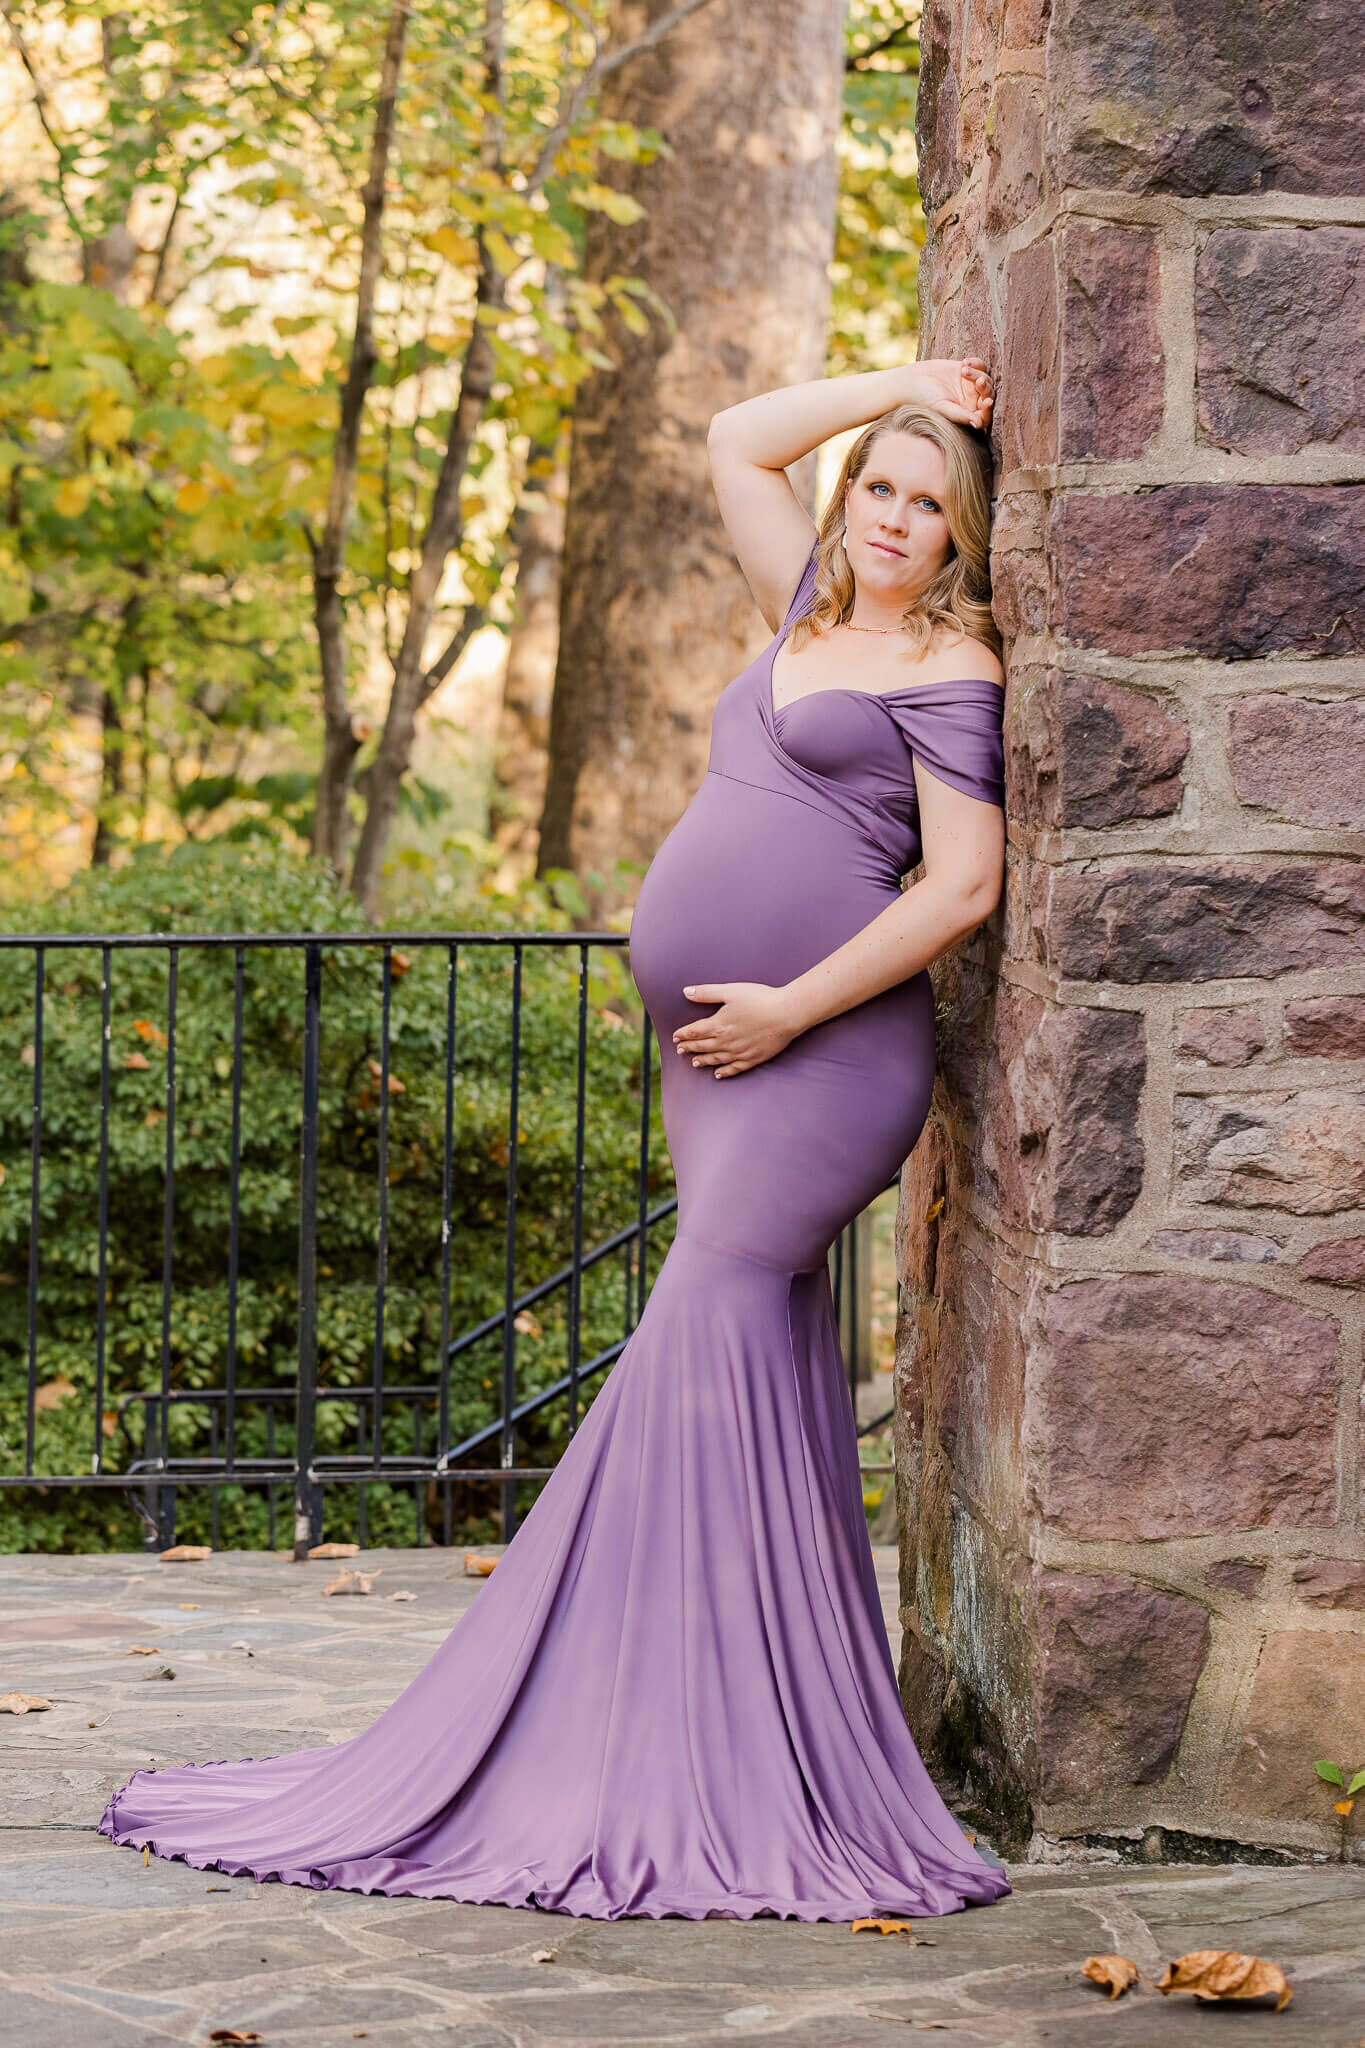 A woman posing against a brick wall for her Northern VA maternity portrait session.